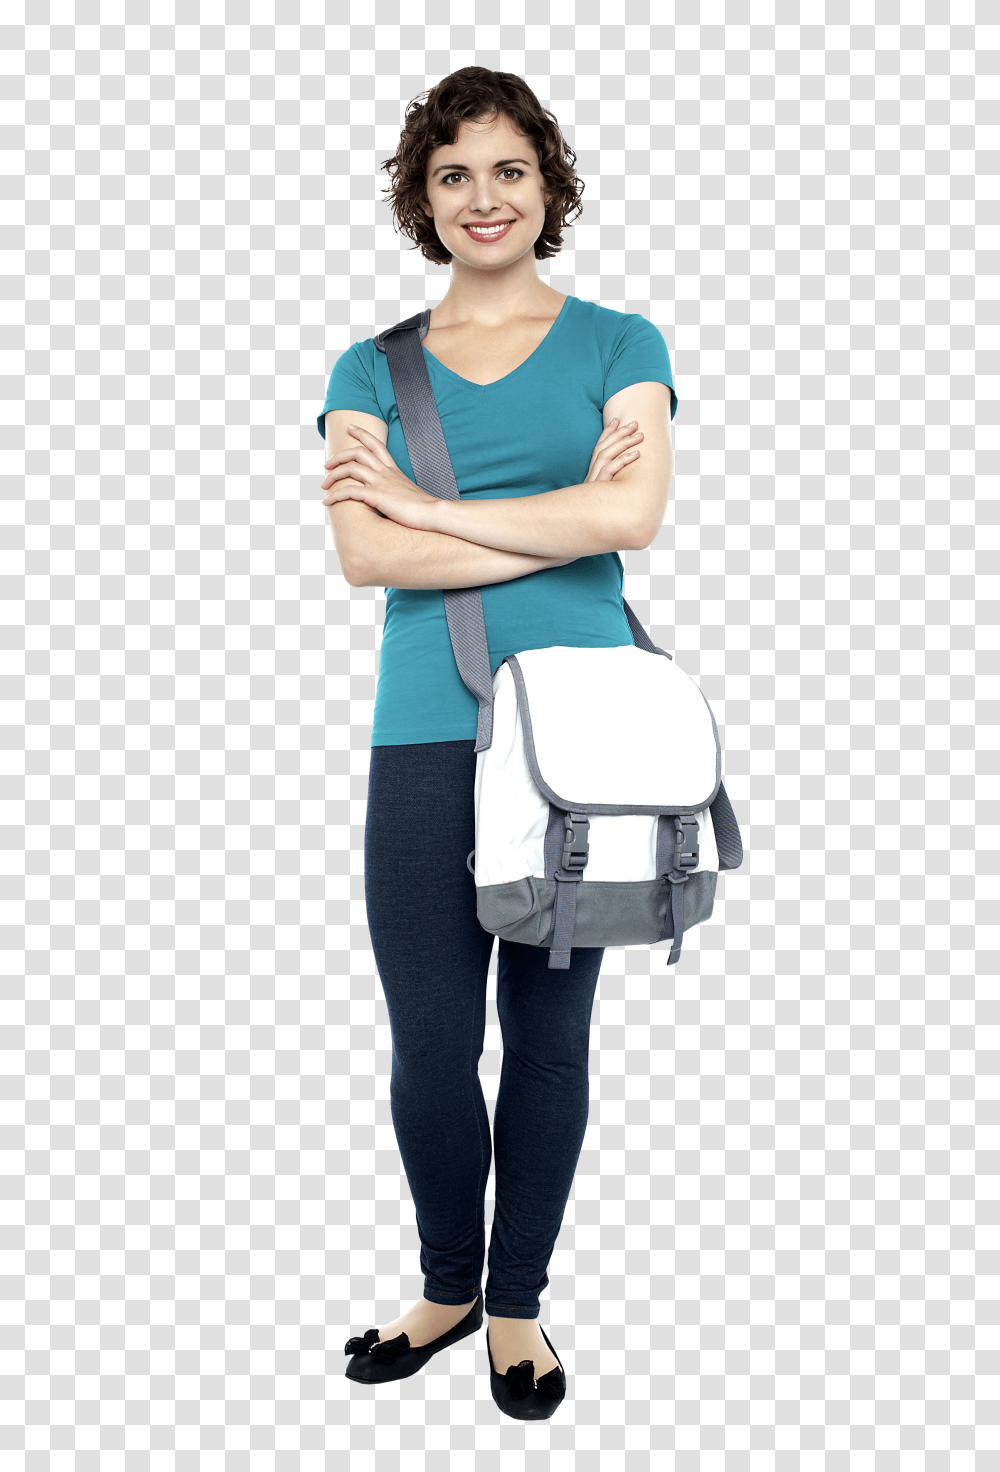 Young Girl Student Image Transparent Png